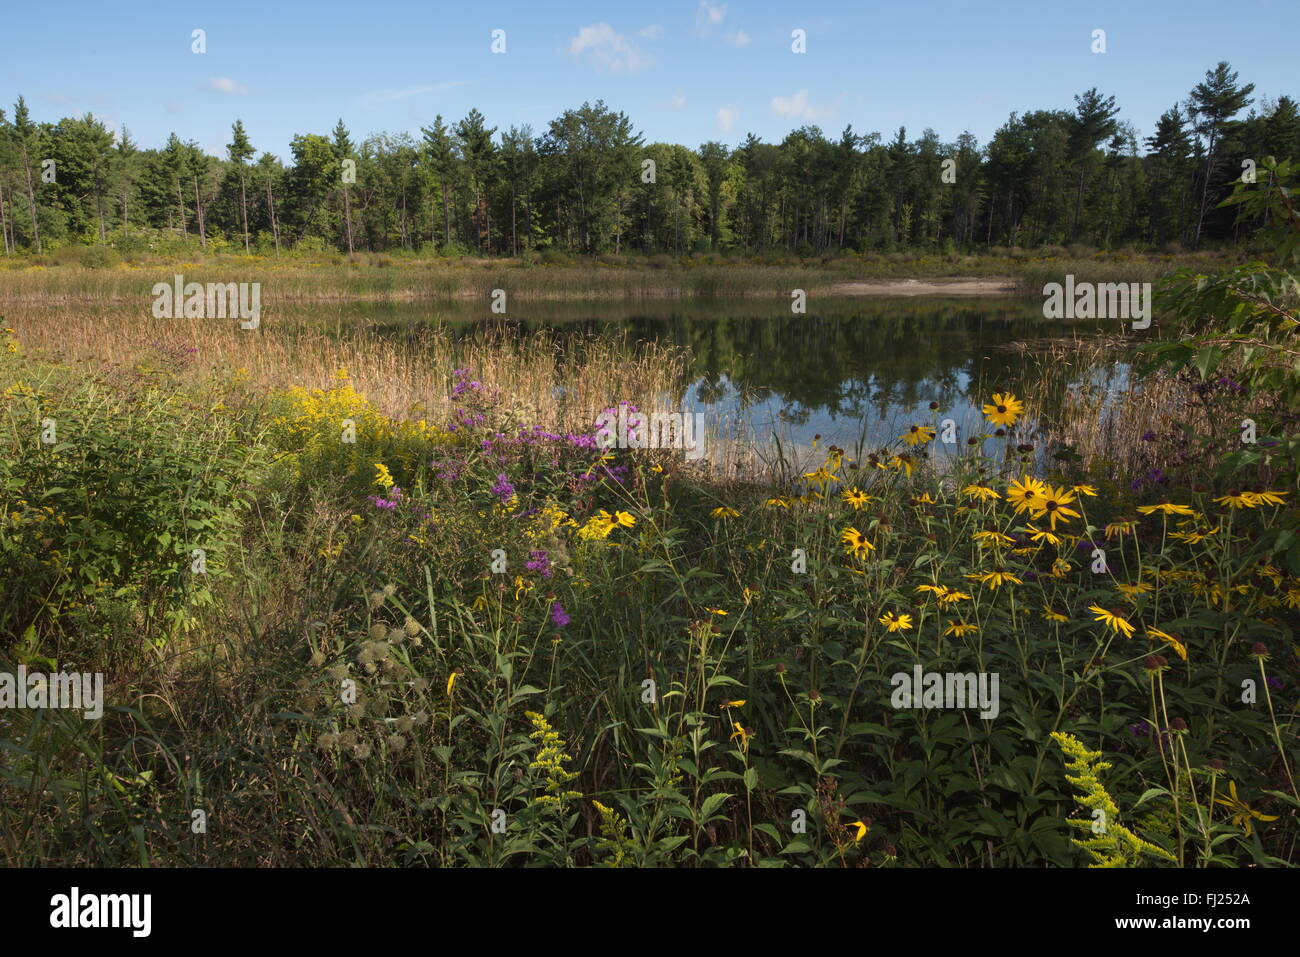 Lush foliage and multiple blossoms of the Black-Eyed Susan adjacent to a large pond with a wooded area in the background. Stock Photo